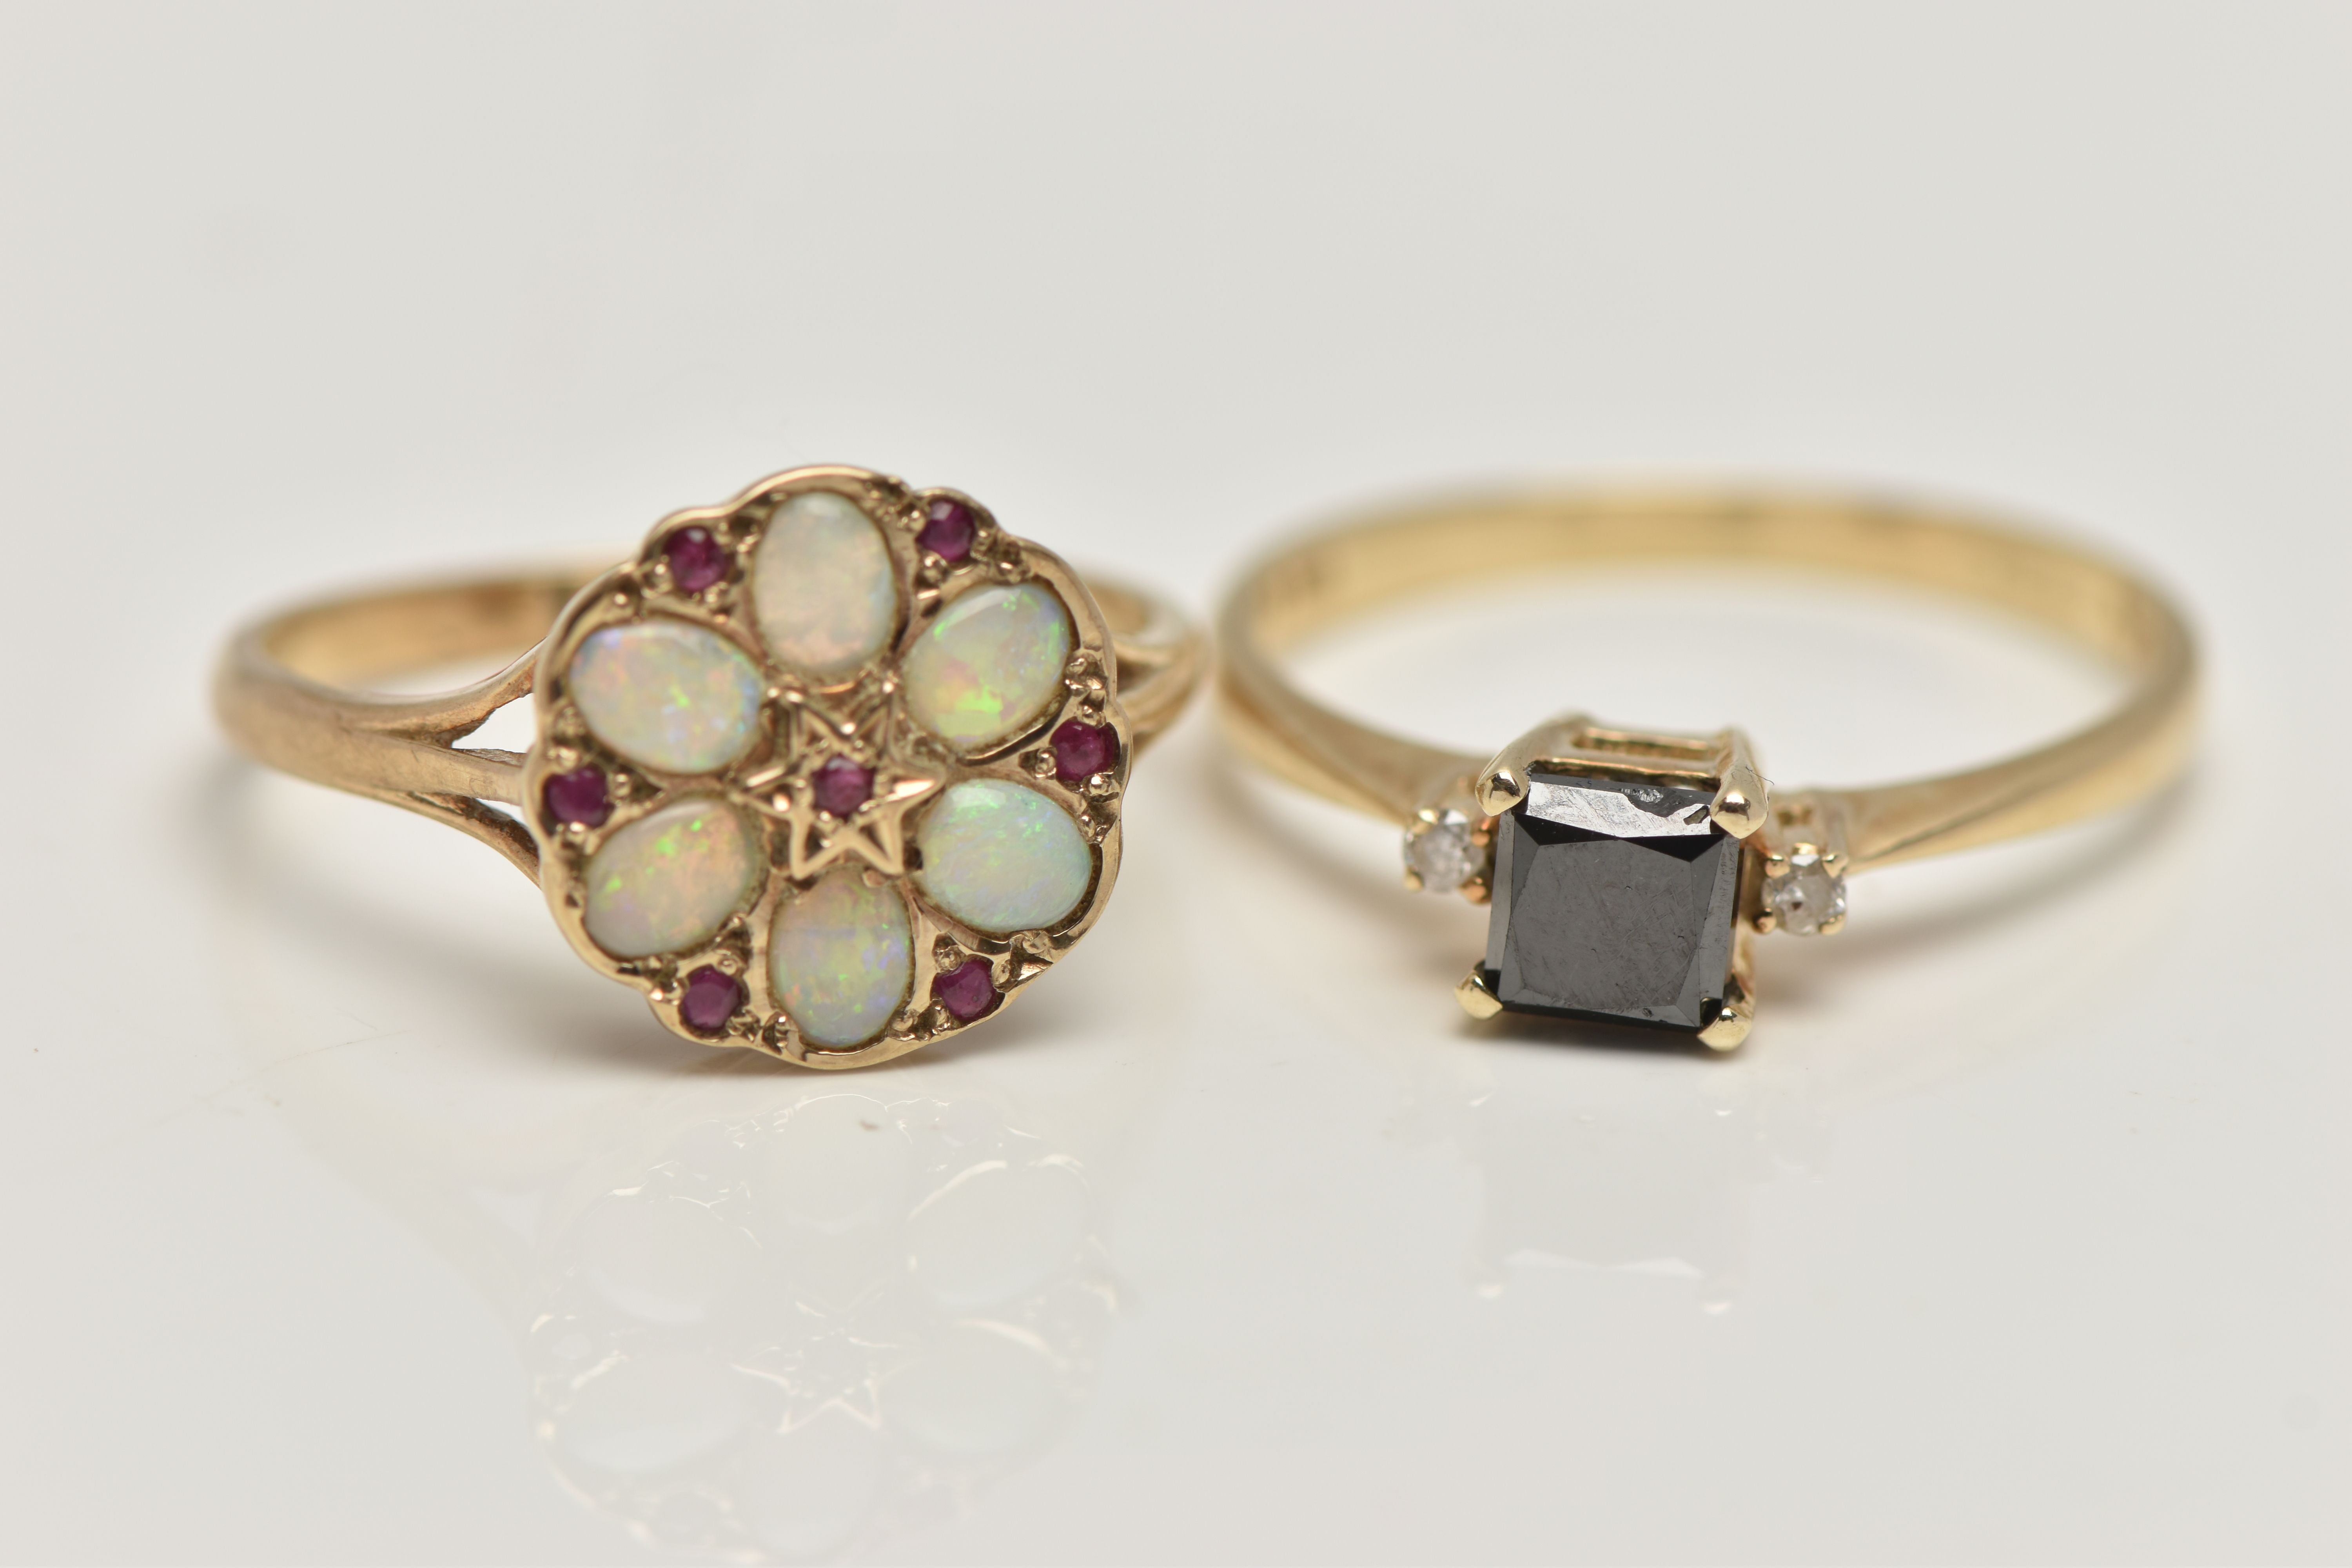 TWO GEM SET RINGS, the first a yellow gold ring set with a princess cut black diamond, flanked